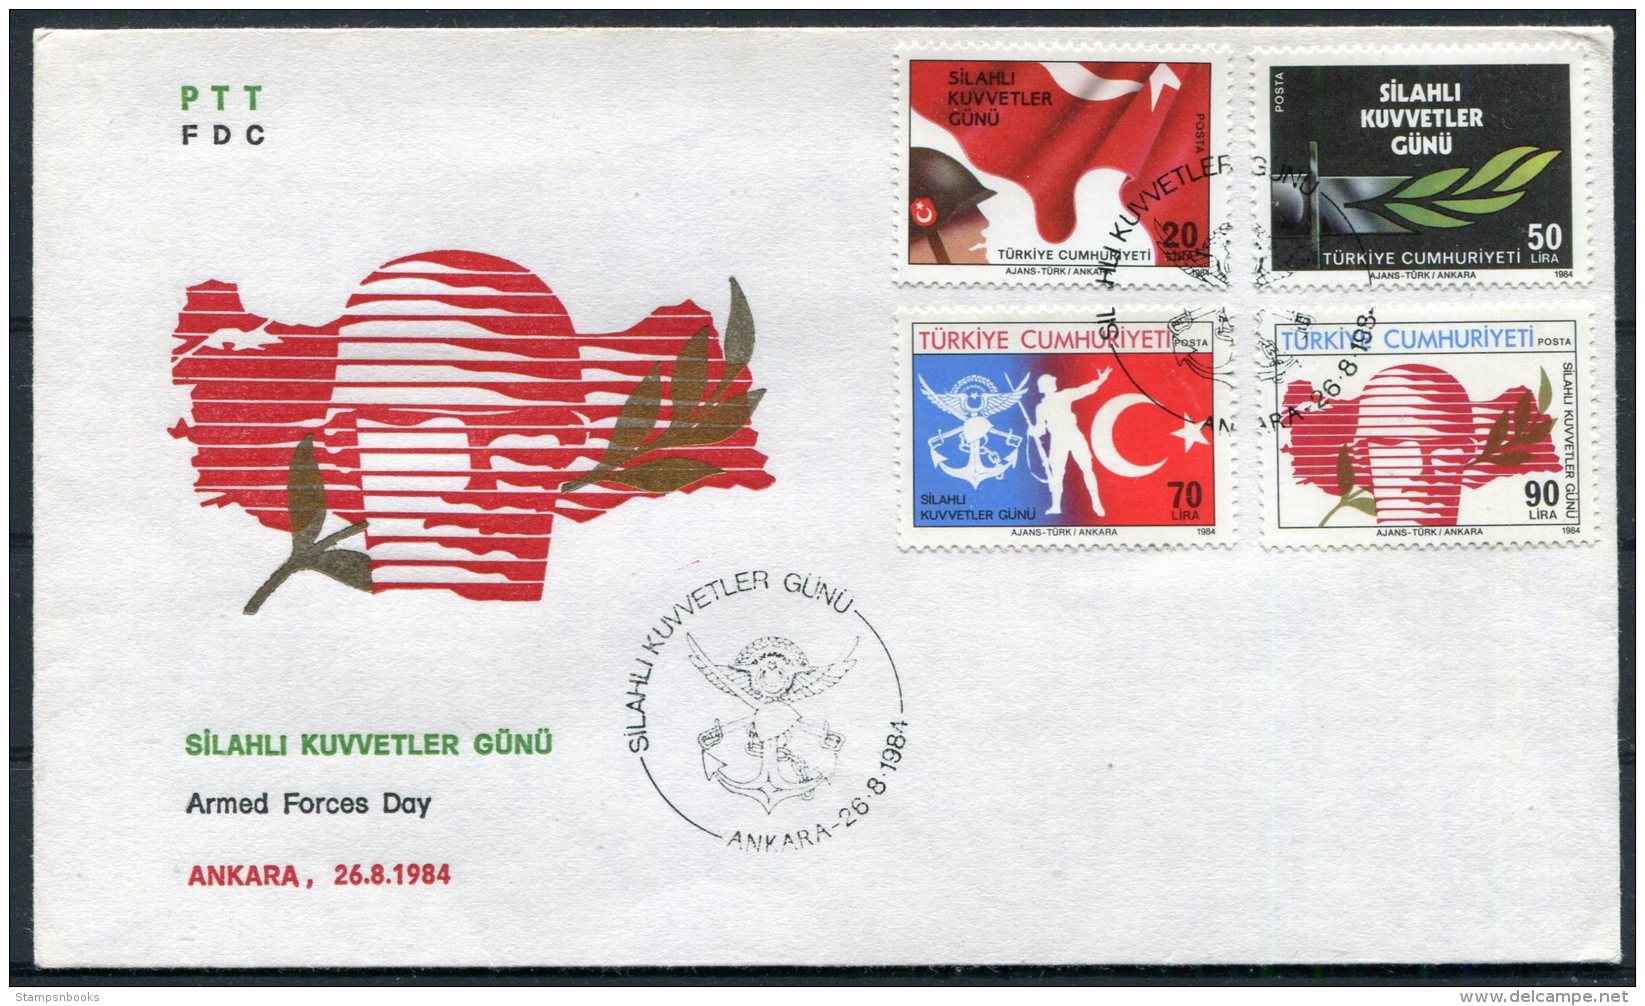 1985 Turkey Armed Forces Day FDC / First Day Cover - FDC